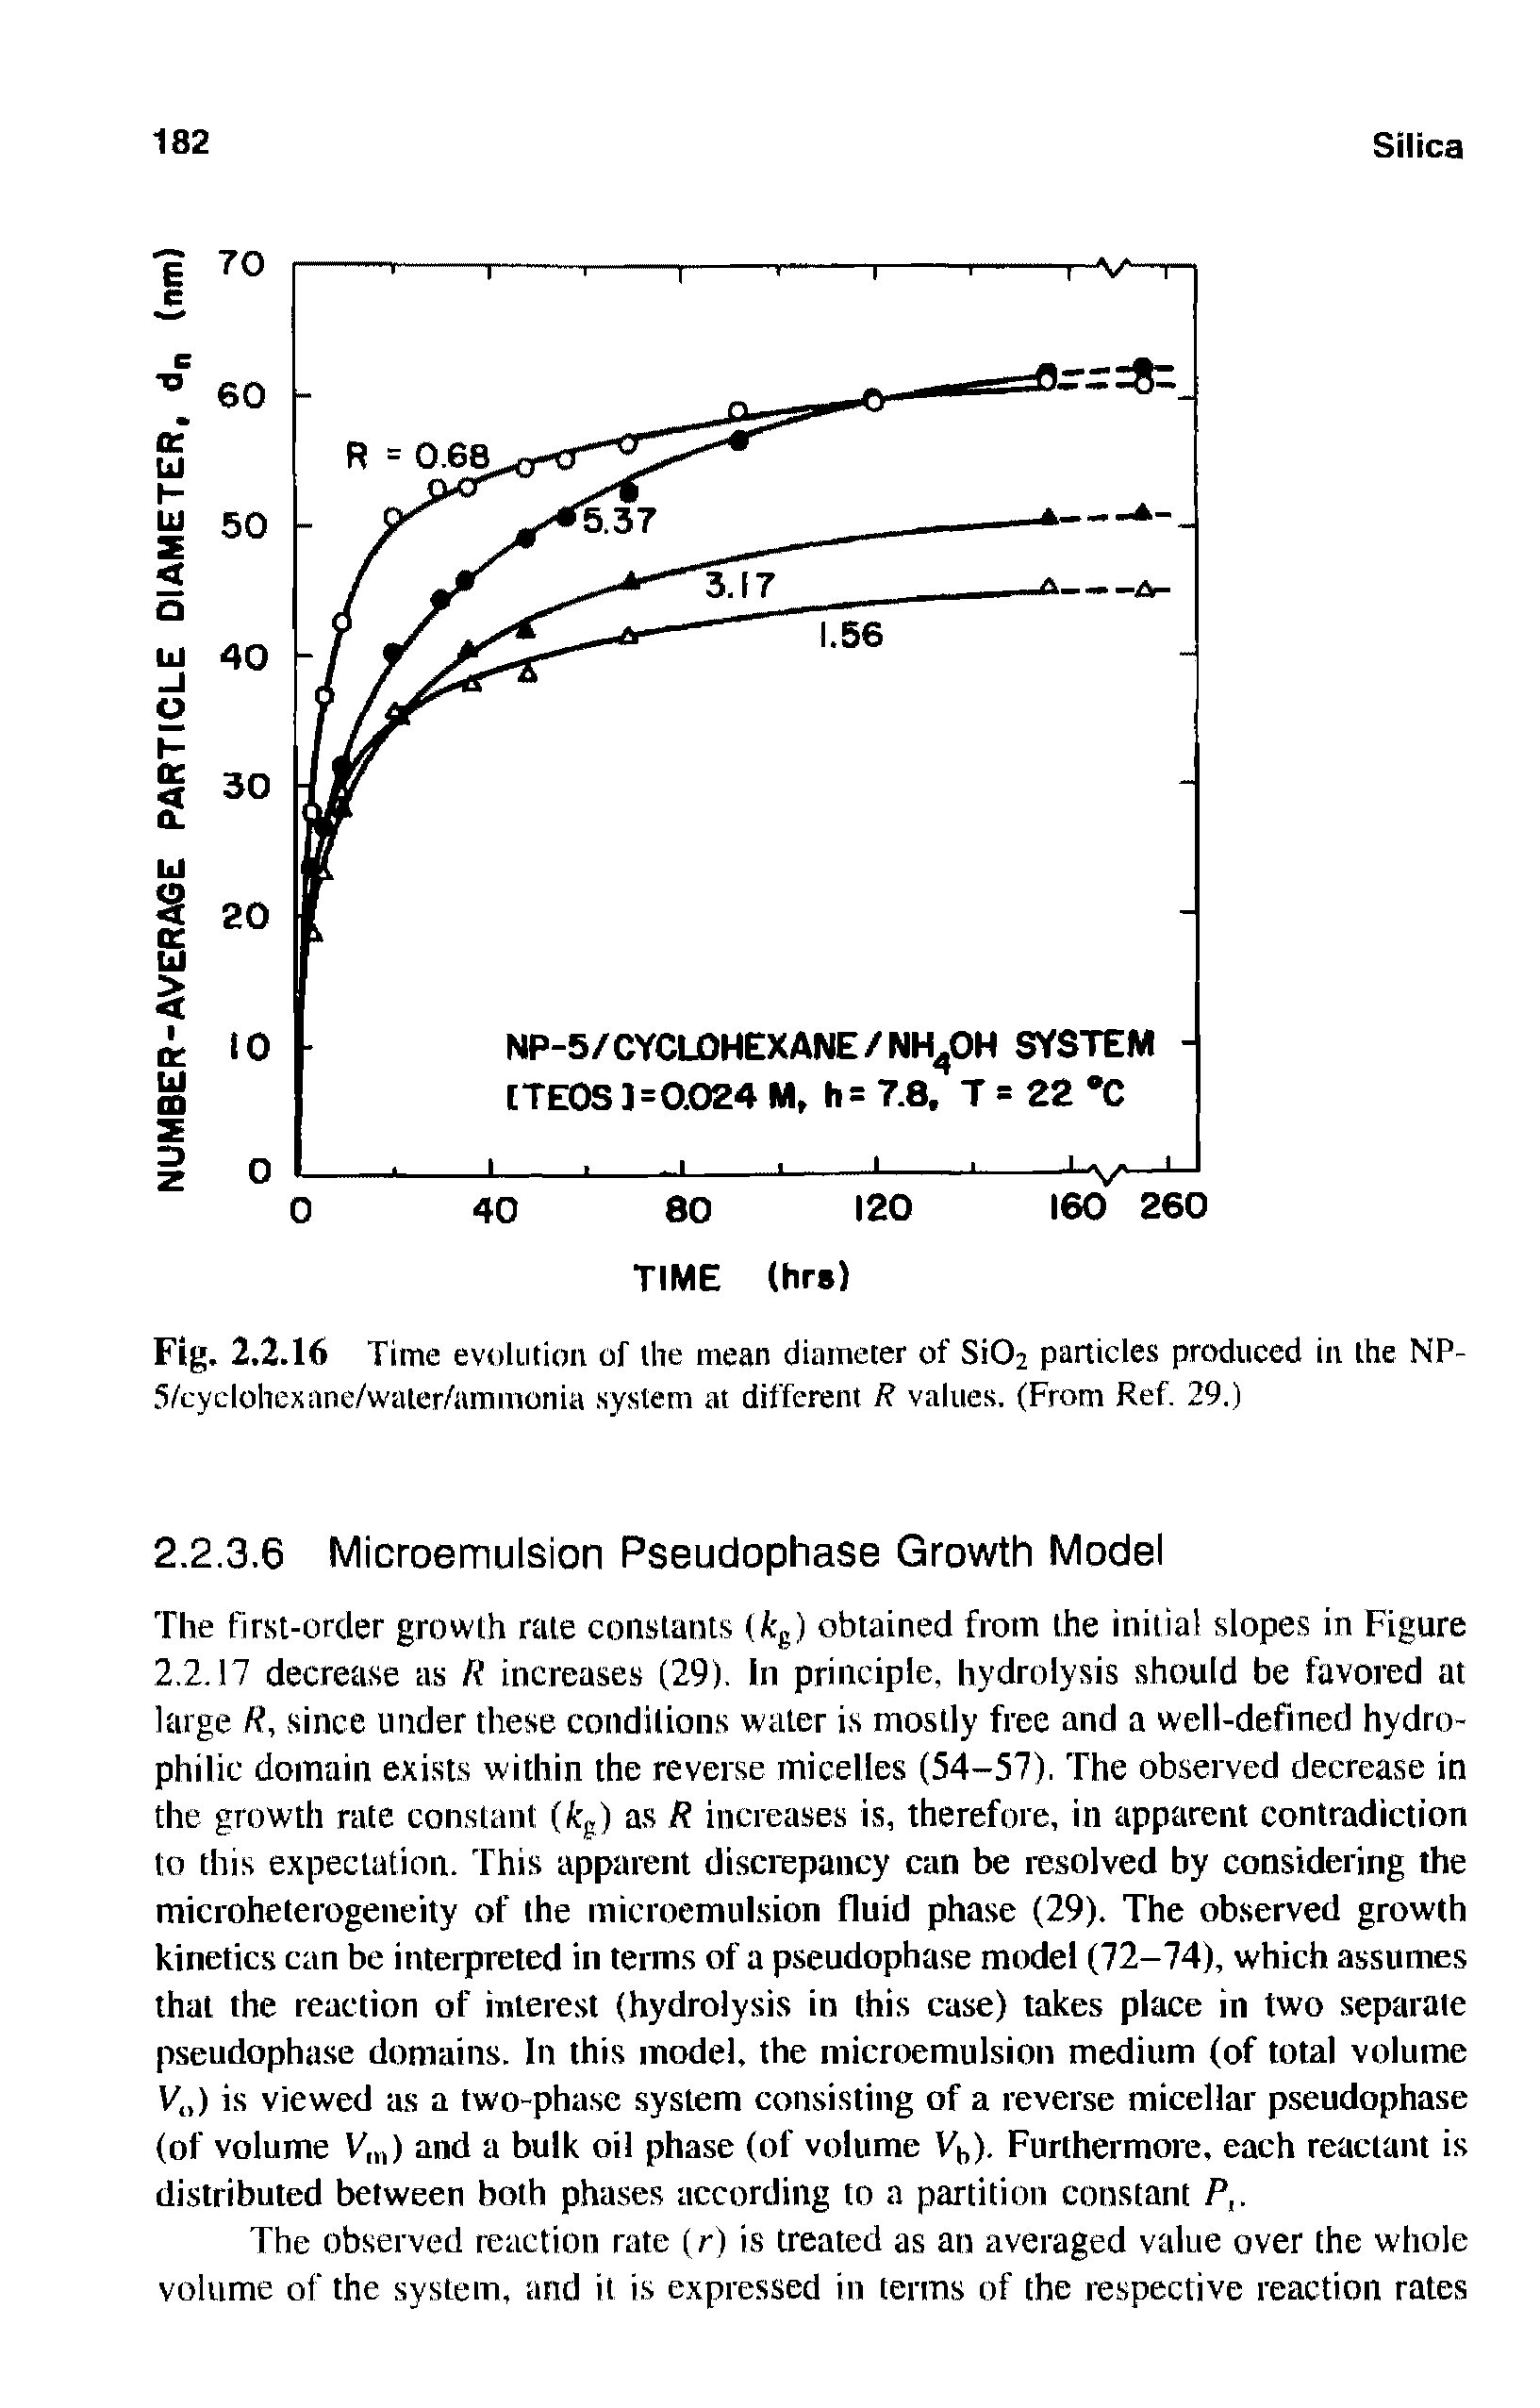 Fig. 2.2.16 Time evolution of the mean diameter of Si02 particles produced in the NP-5/cyclohexane/water/ammonia system at different R values. (From Ref. 29.)...